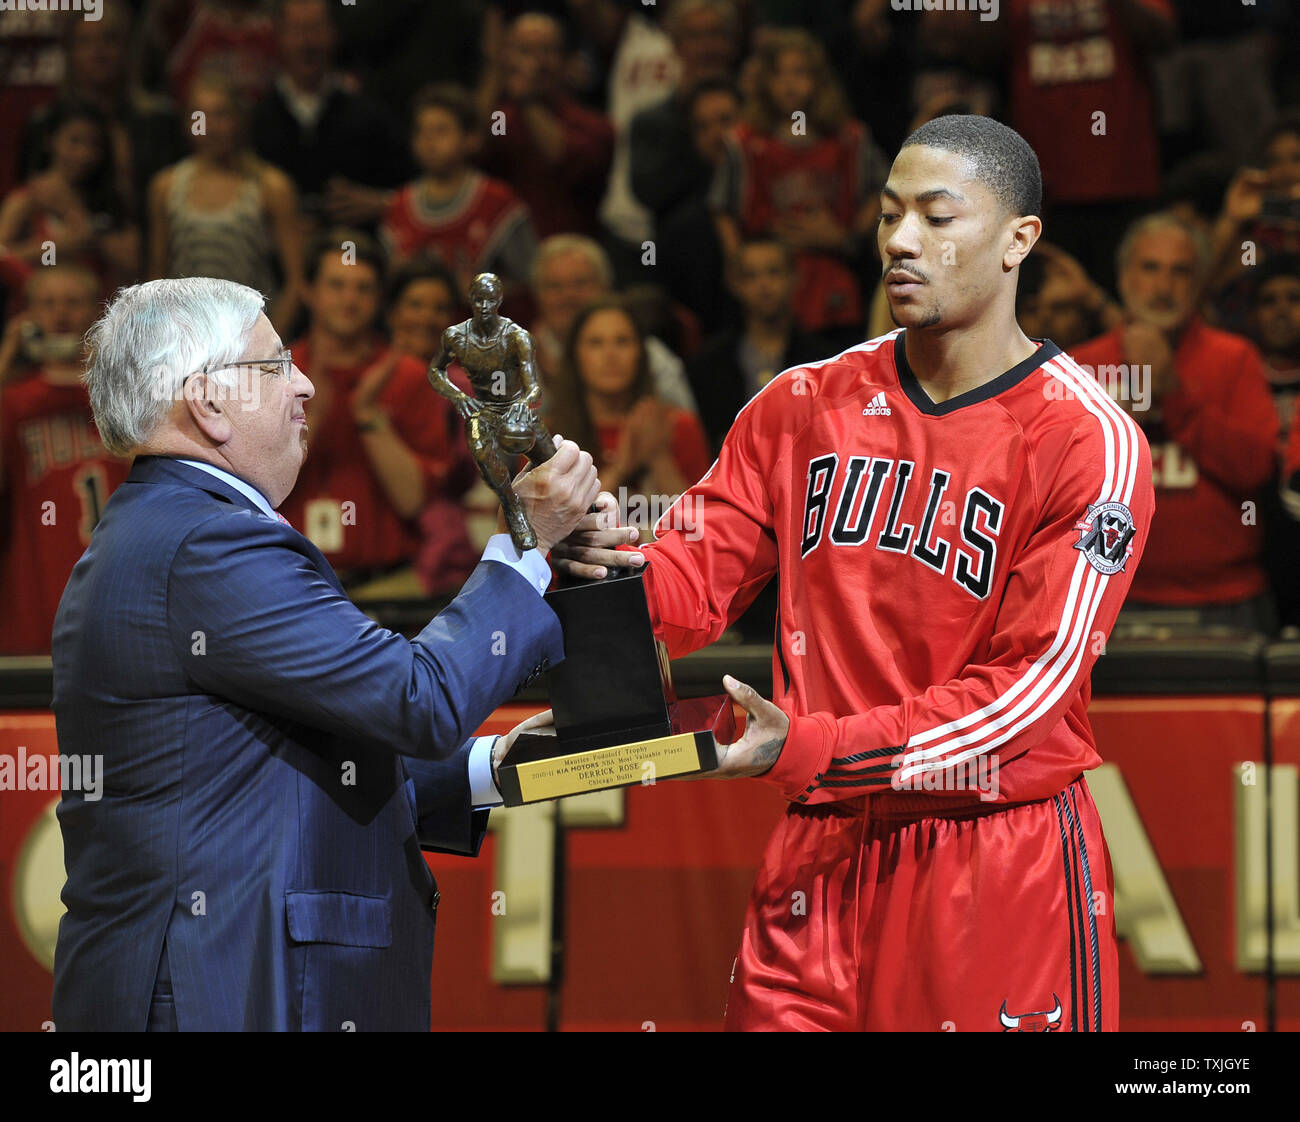 Chicago Bulls guard Derrick Rose (R) is presented the Maurice Podoloff  Trophy by NBA Commissioner David Stern after being named the NBA MVP at a  ceremony before game 2 of the NBA